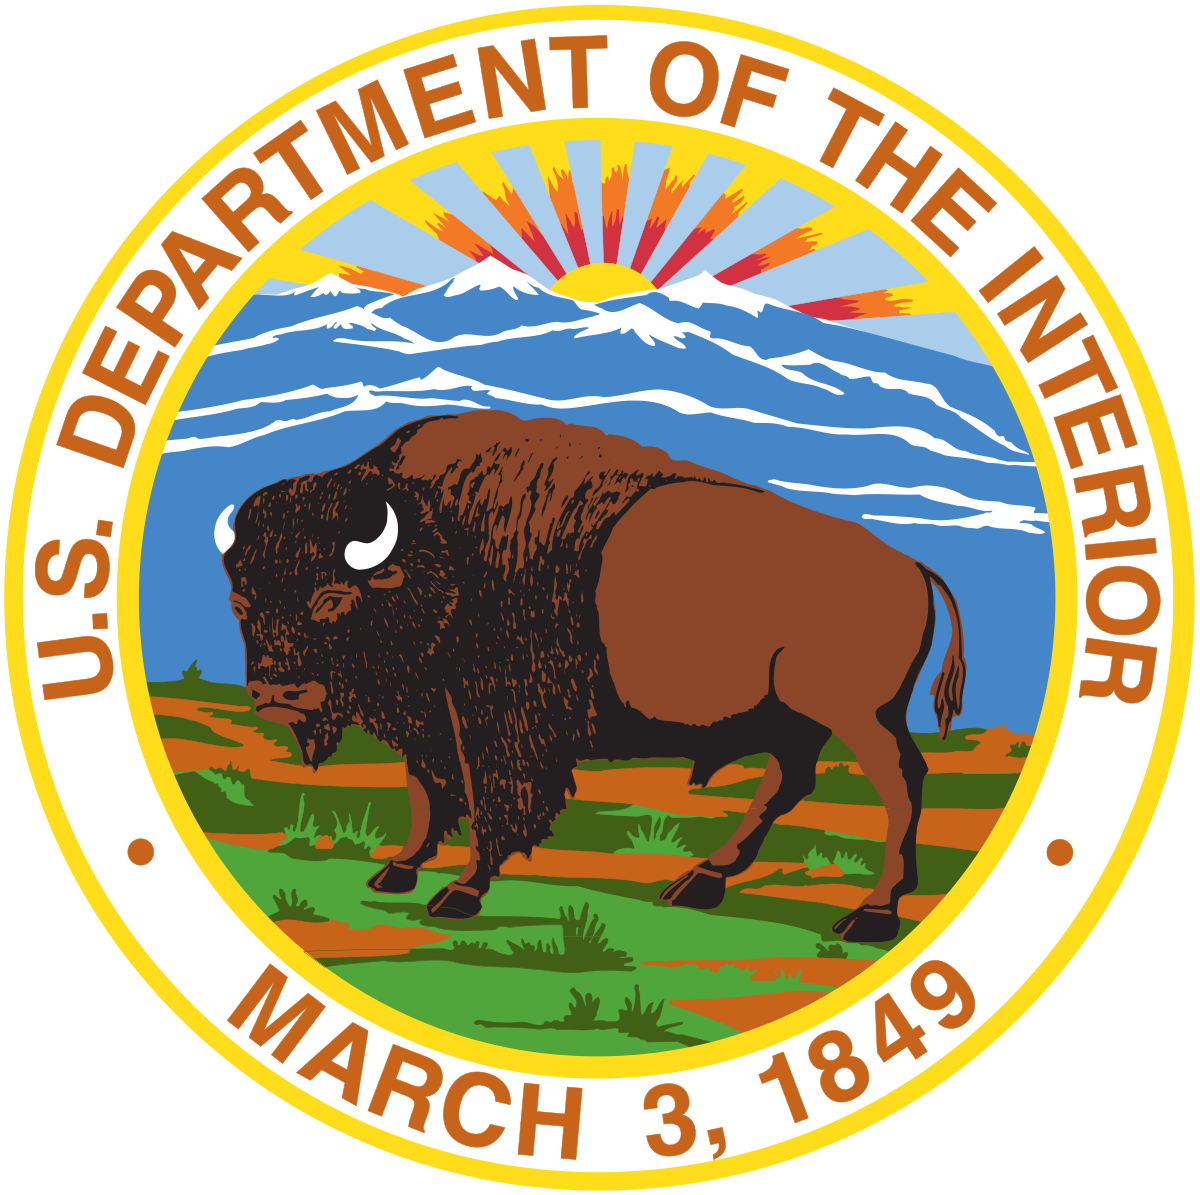 U.S. Interior Department Declined to Support Costs